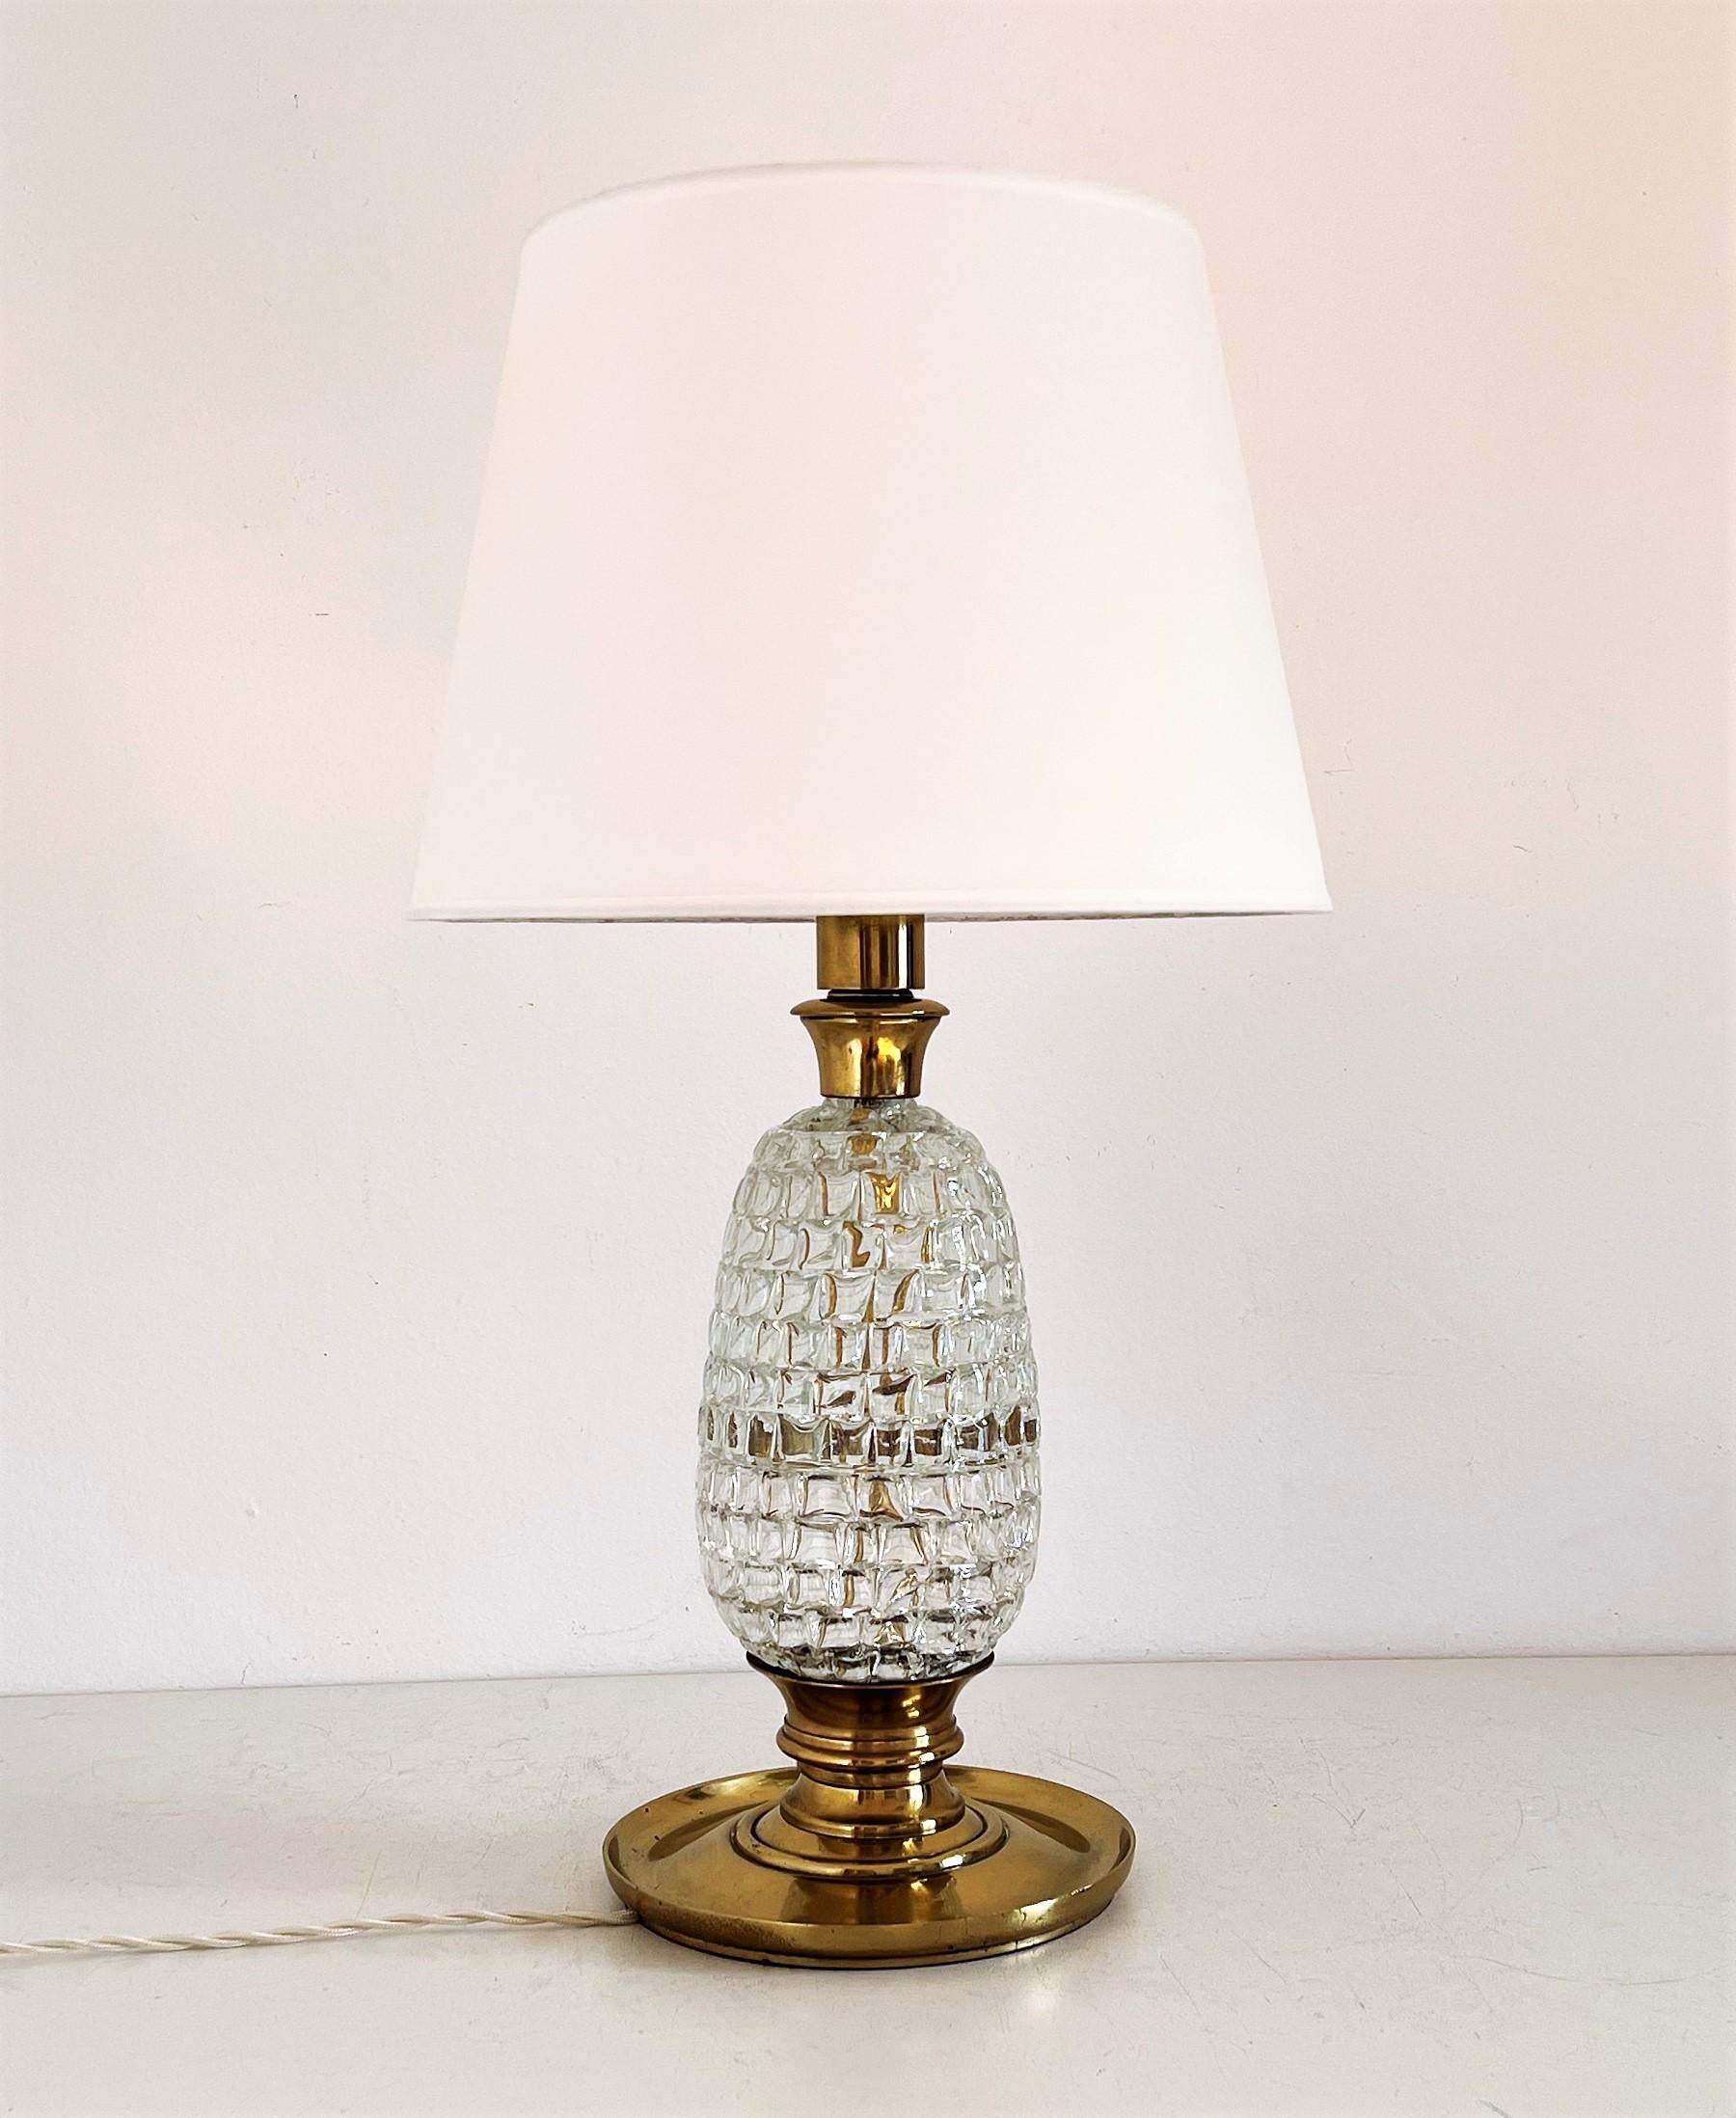 Italian Mid-Century Table Lamp with Brass and Creased Murano Glass Body, 1960s For Sale 4